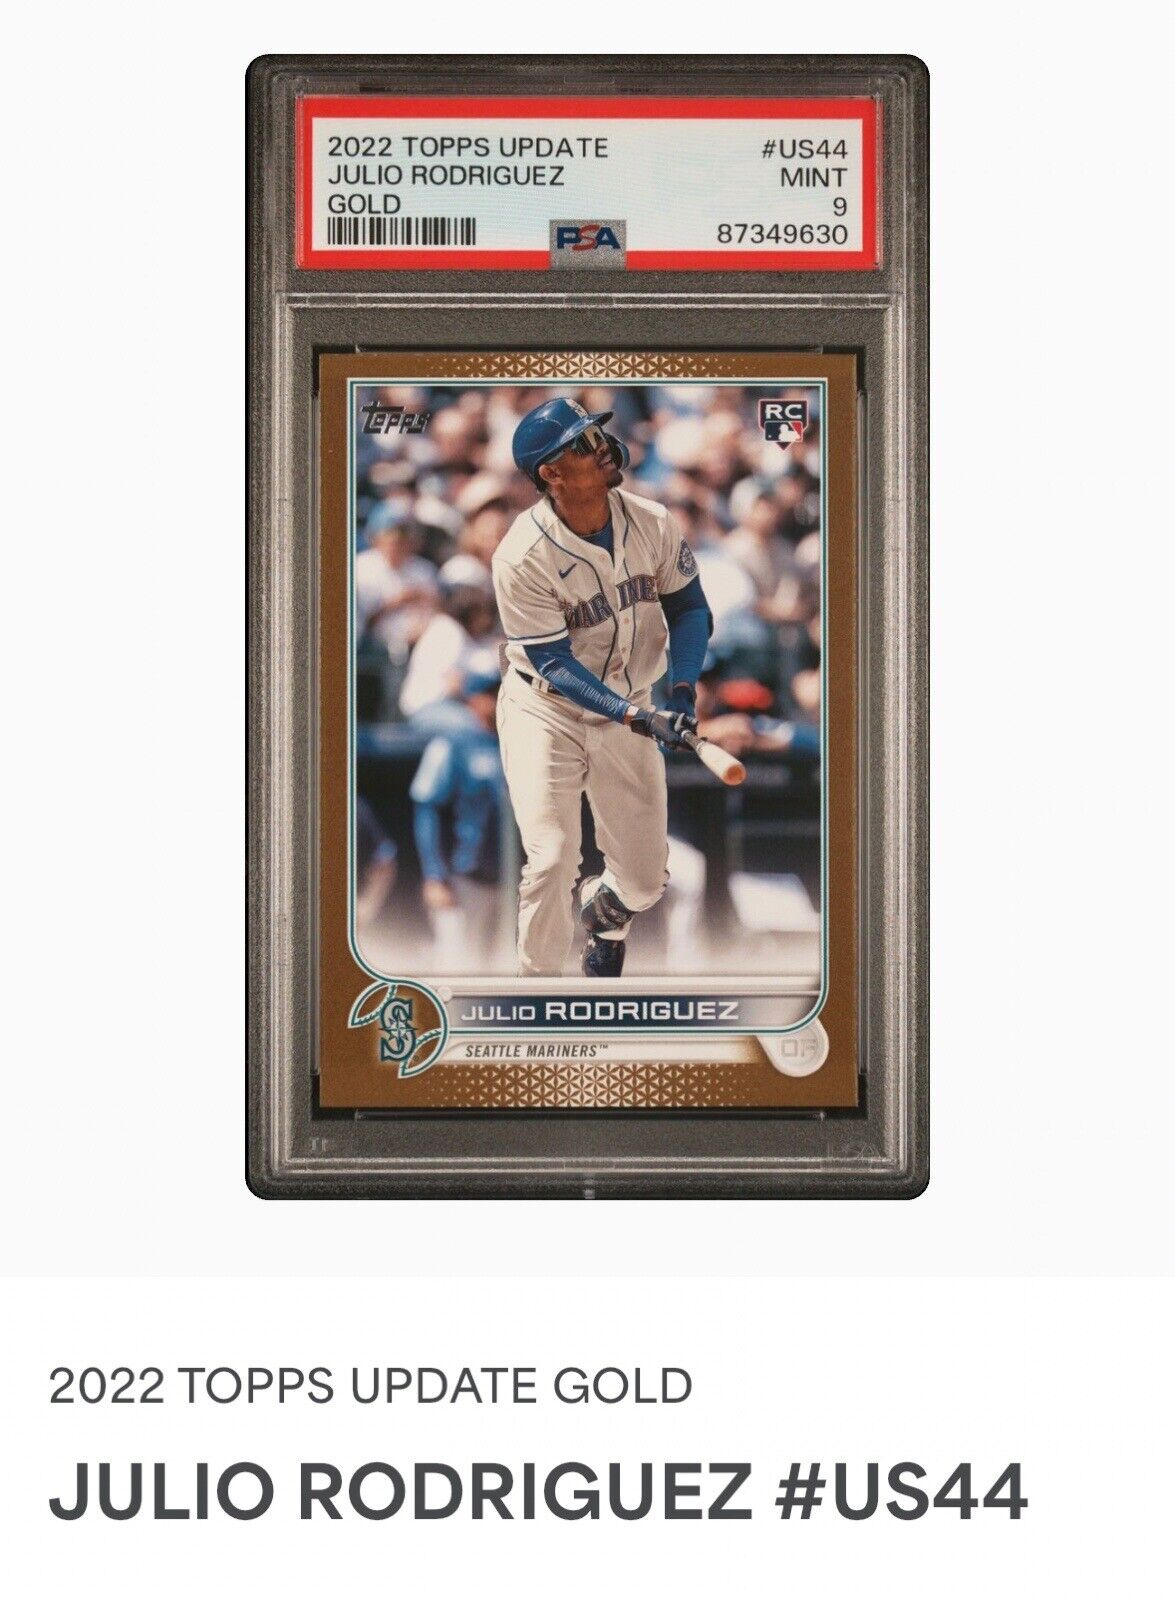 2022 Topps Update JULIO RODRIGUEZ Gold Rookie RC /2022 #US44 / PSA 9